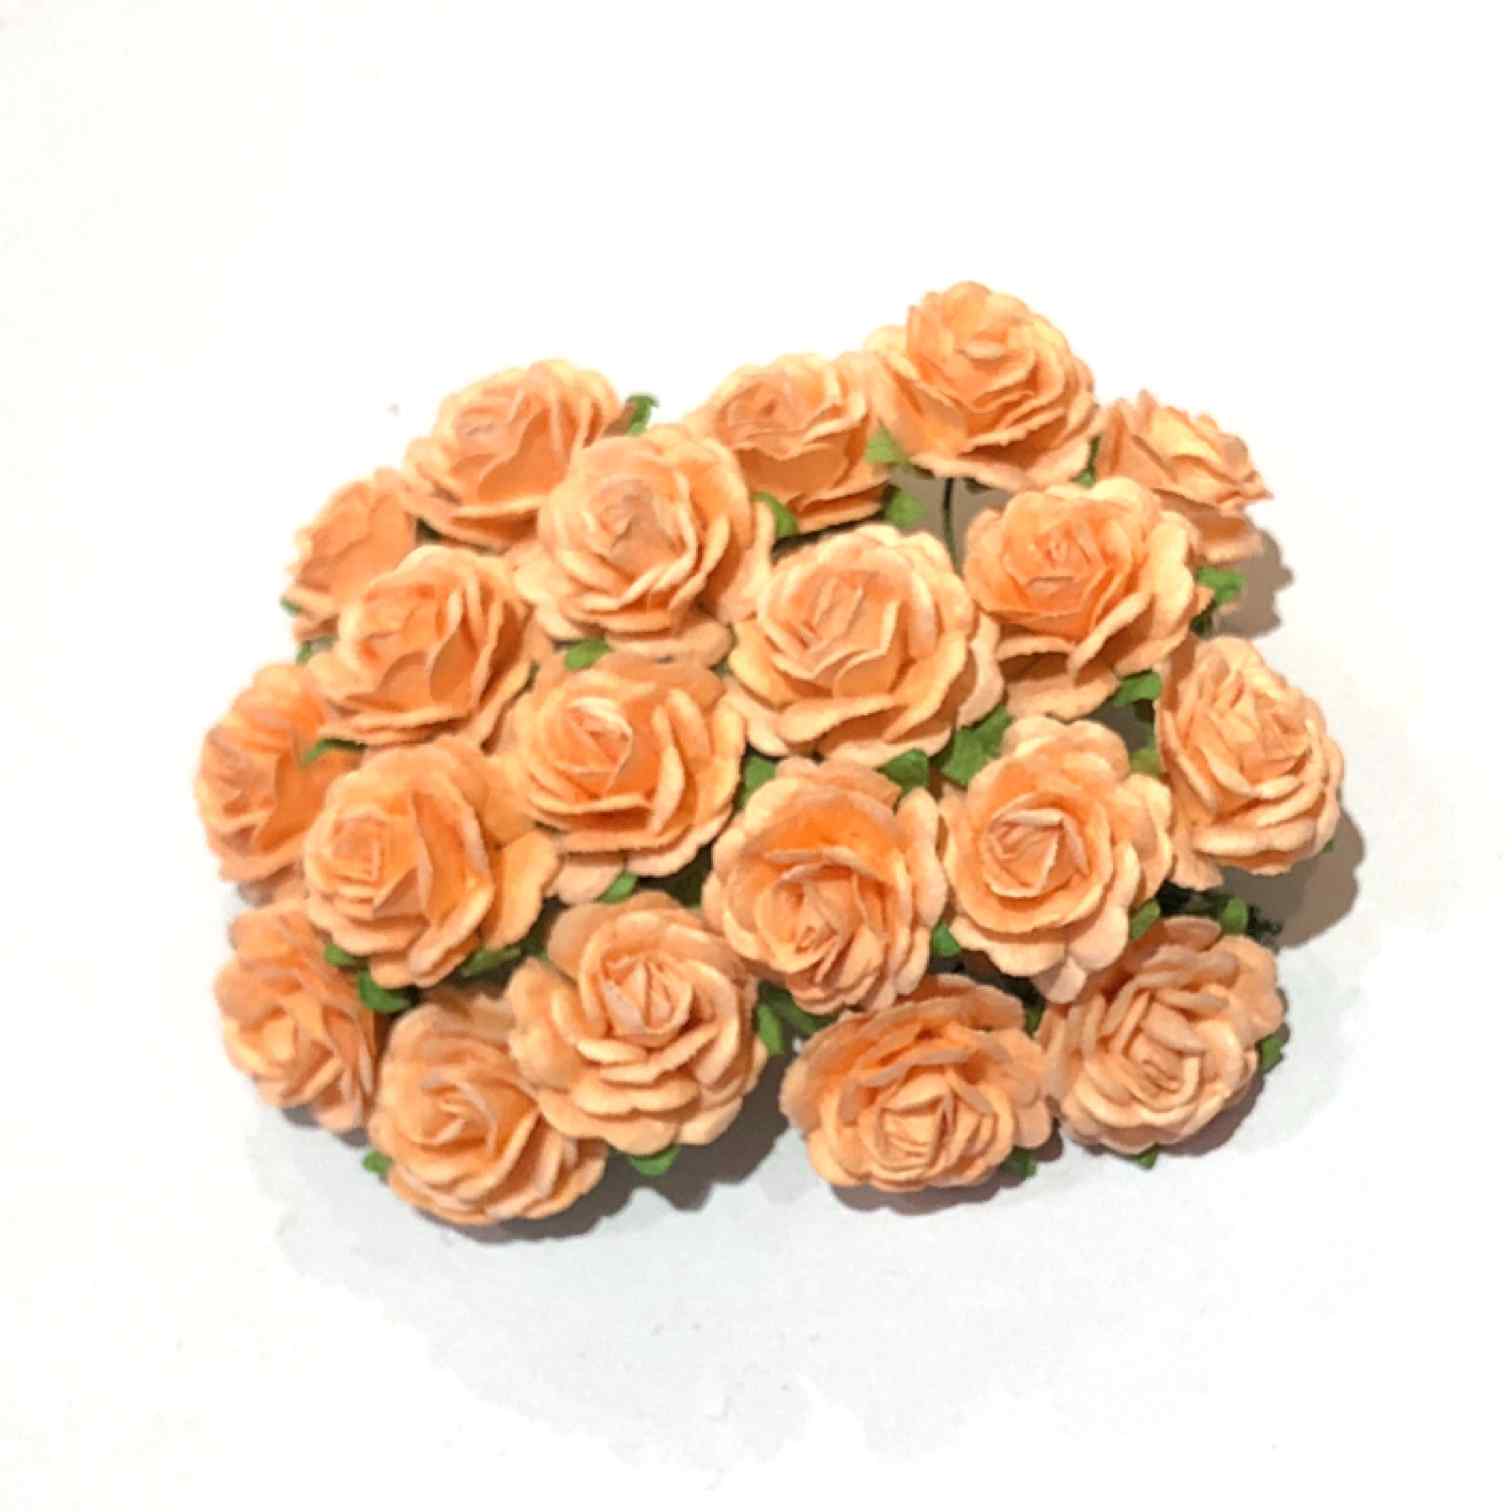 Apricot Open Mulberry Paper Roses Or065